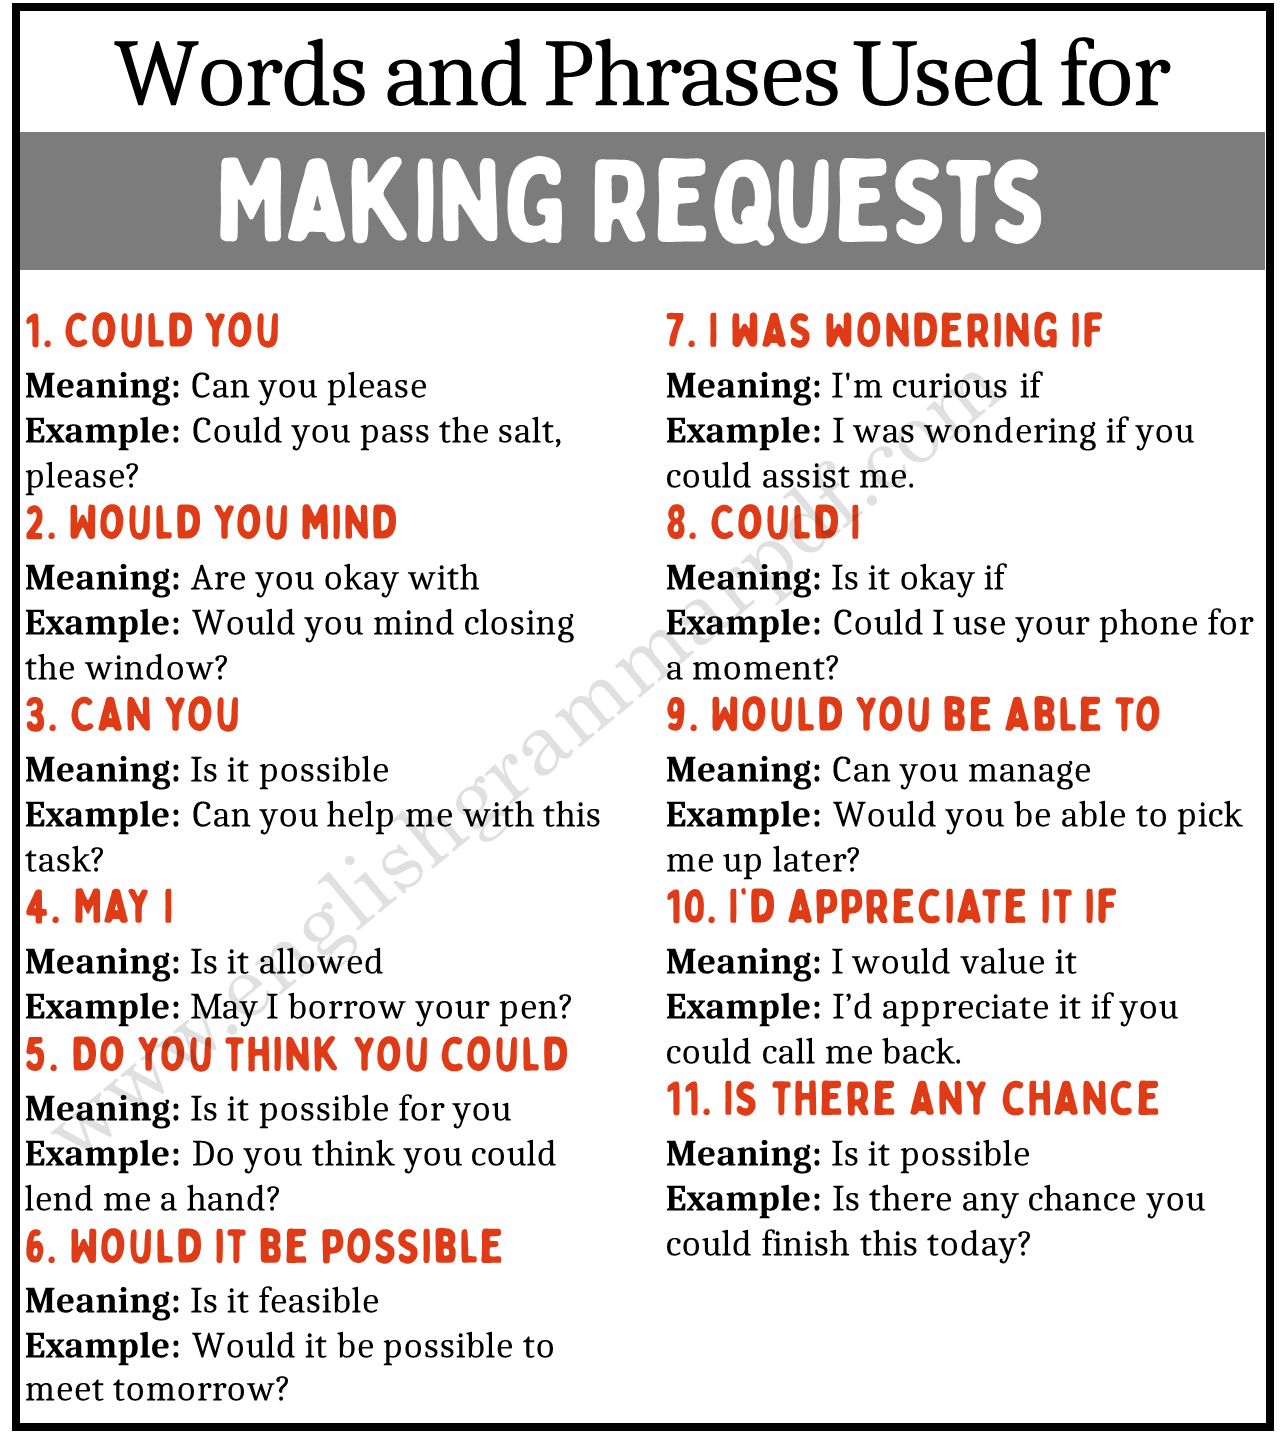 Phrases to Use for Making Requests